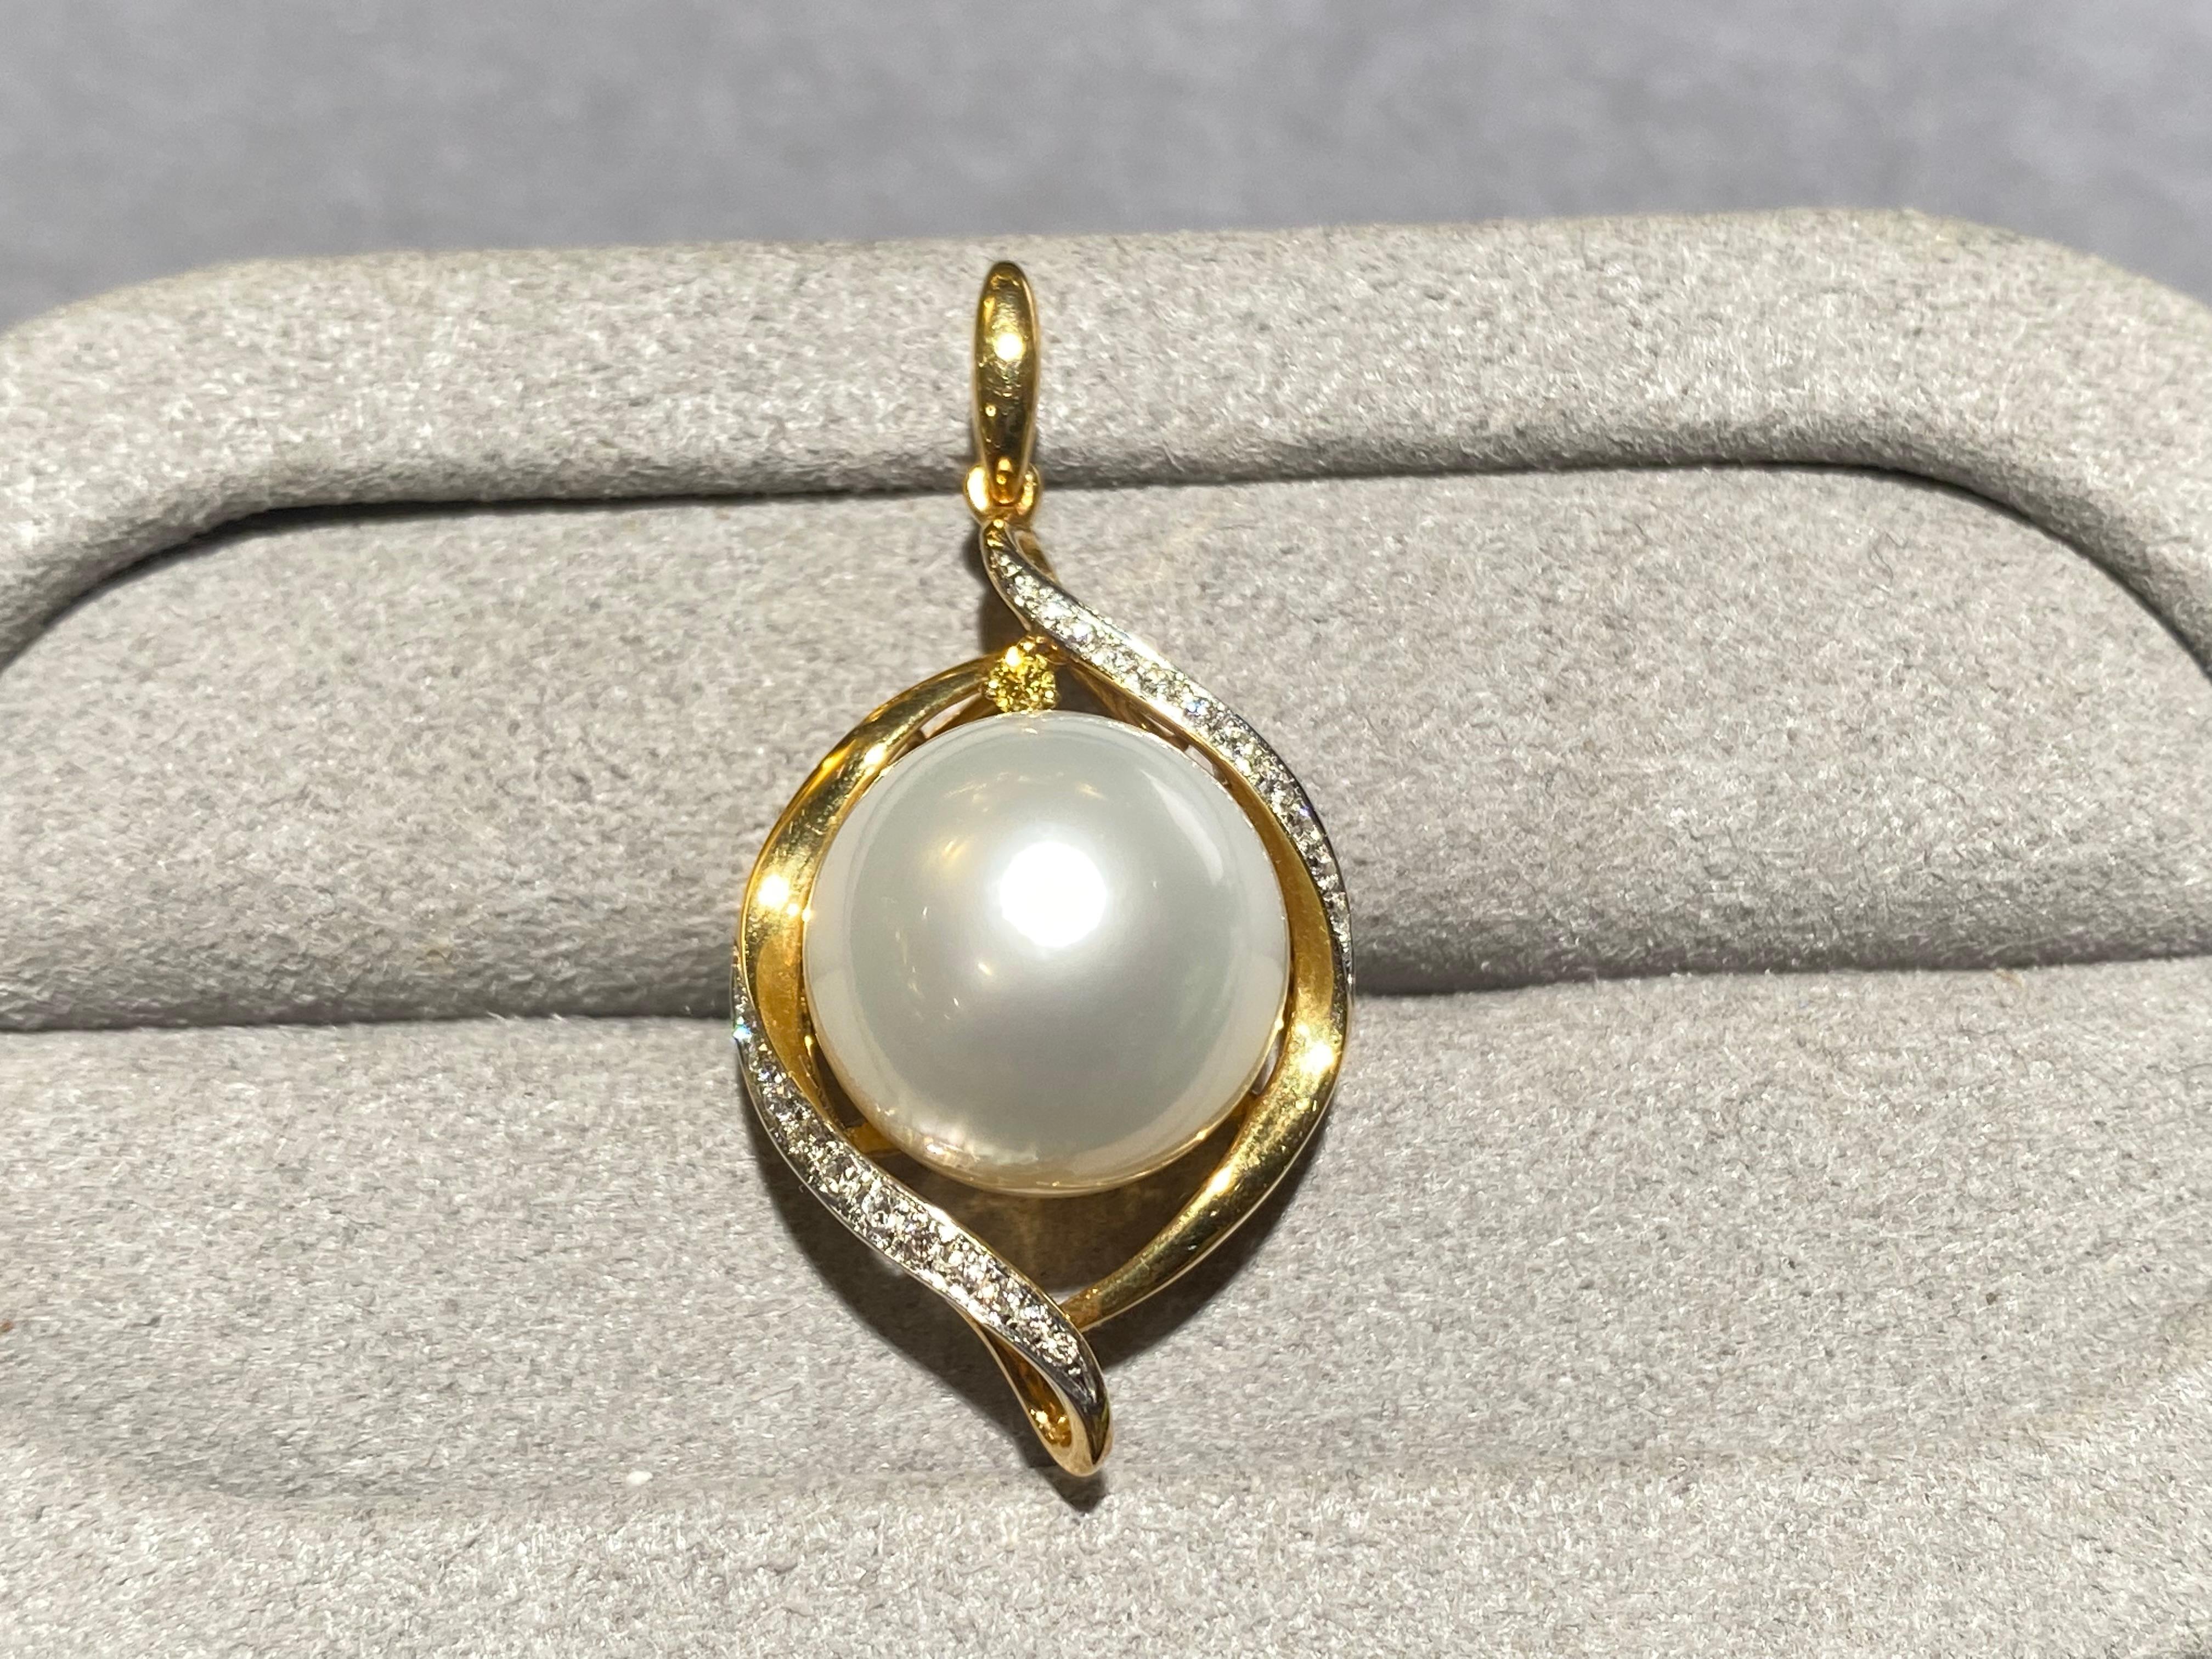 A 12 mm White Australian South Sea Pearl and Diamond pendant in 18k yellow gold. It is a design that resemble an eye, with the pearl represent the eye ball set between the 18k yellow gold eye lids. The 